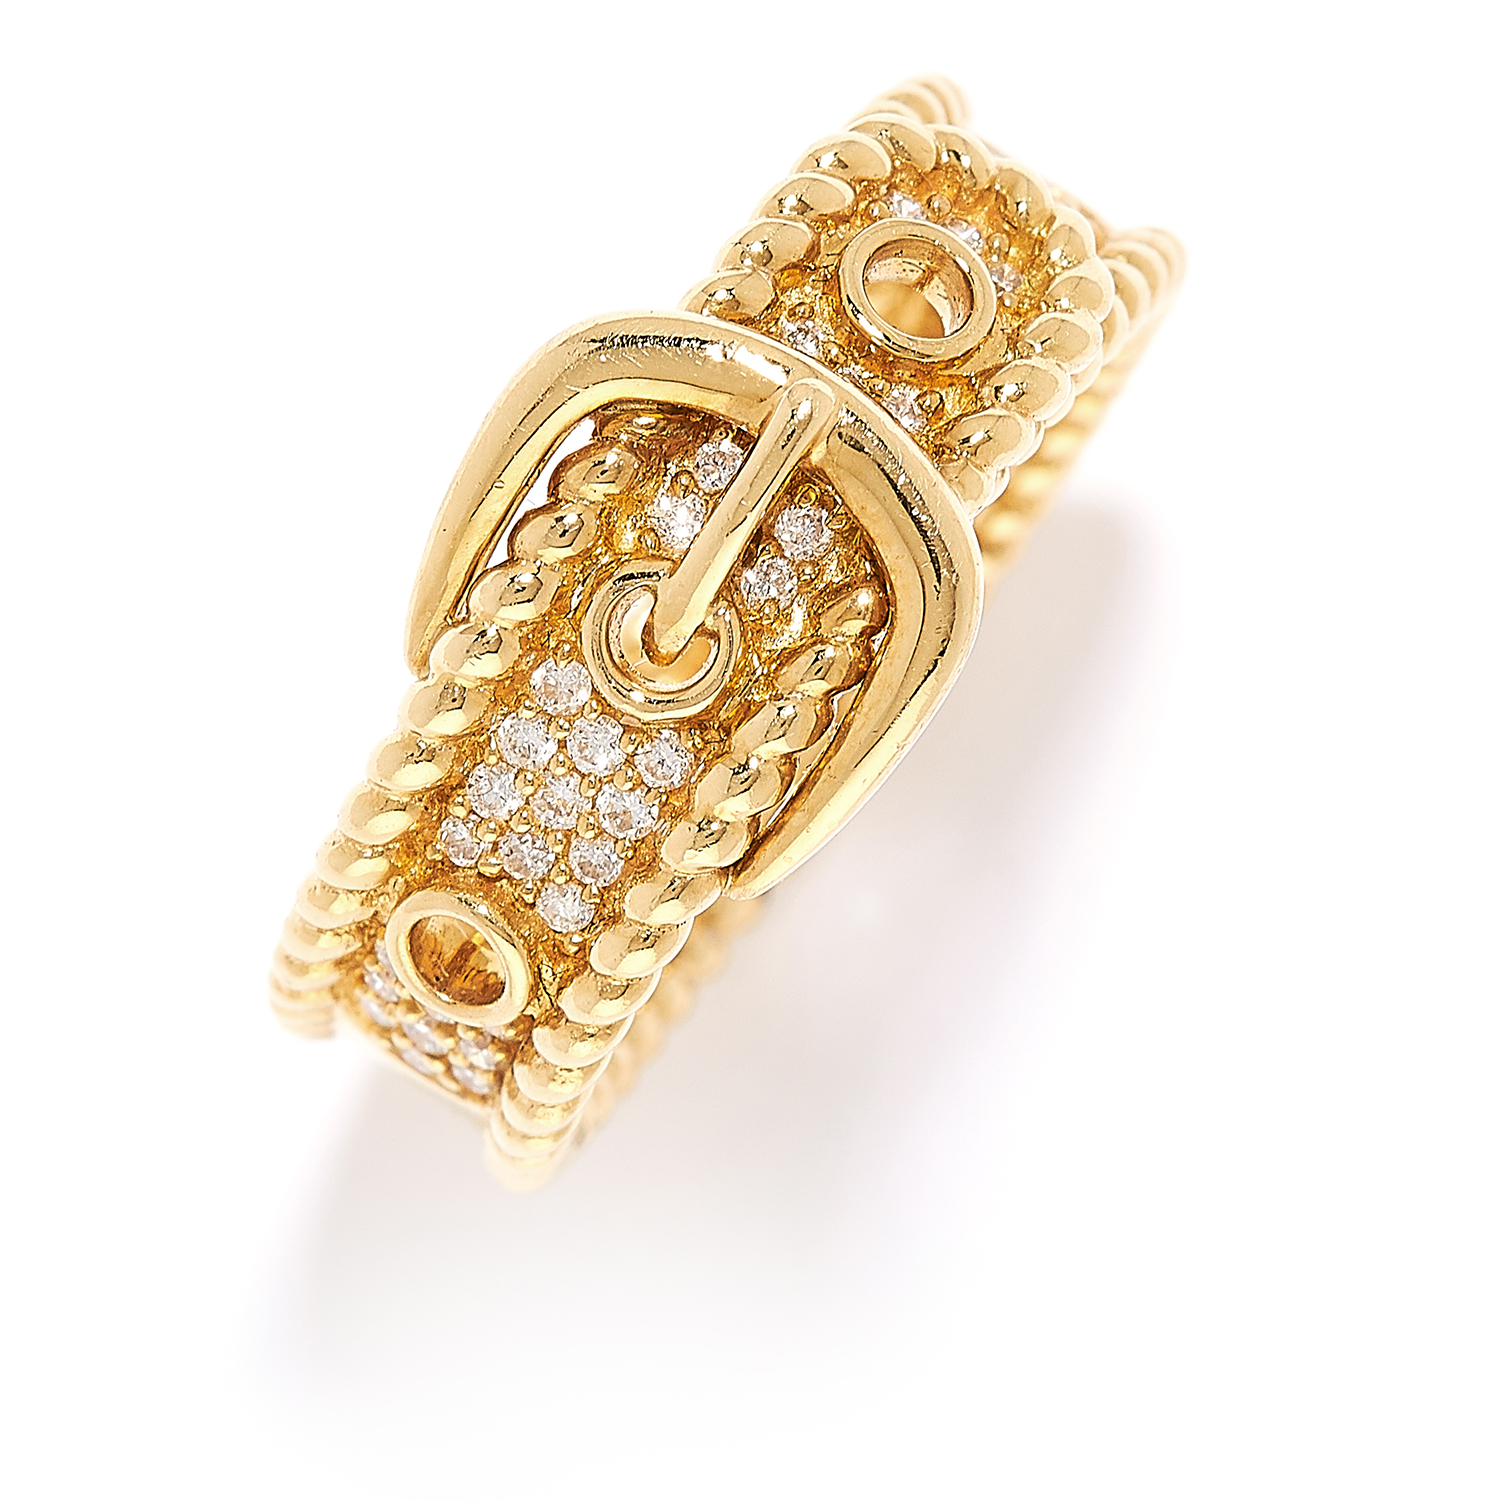 DIAMOND RING in 18ct yellow gold, designed as a buckle set with round cut diamonds, stamped 18K,